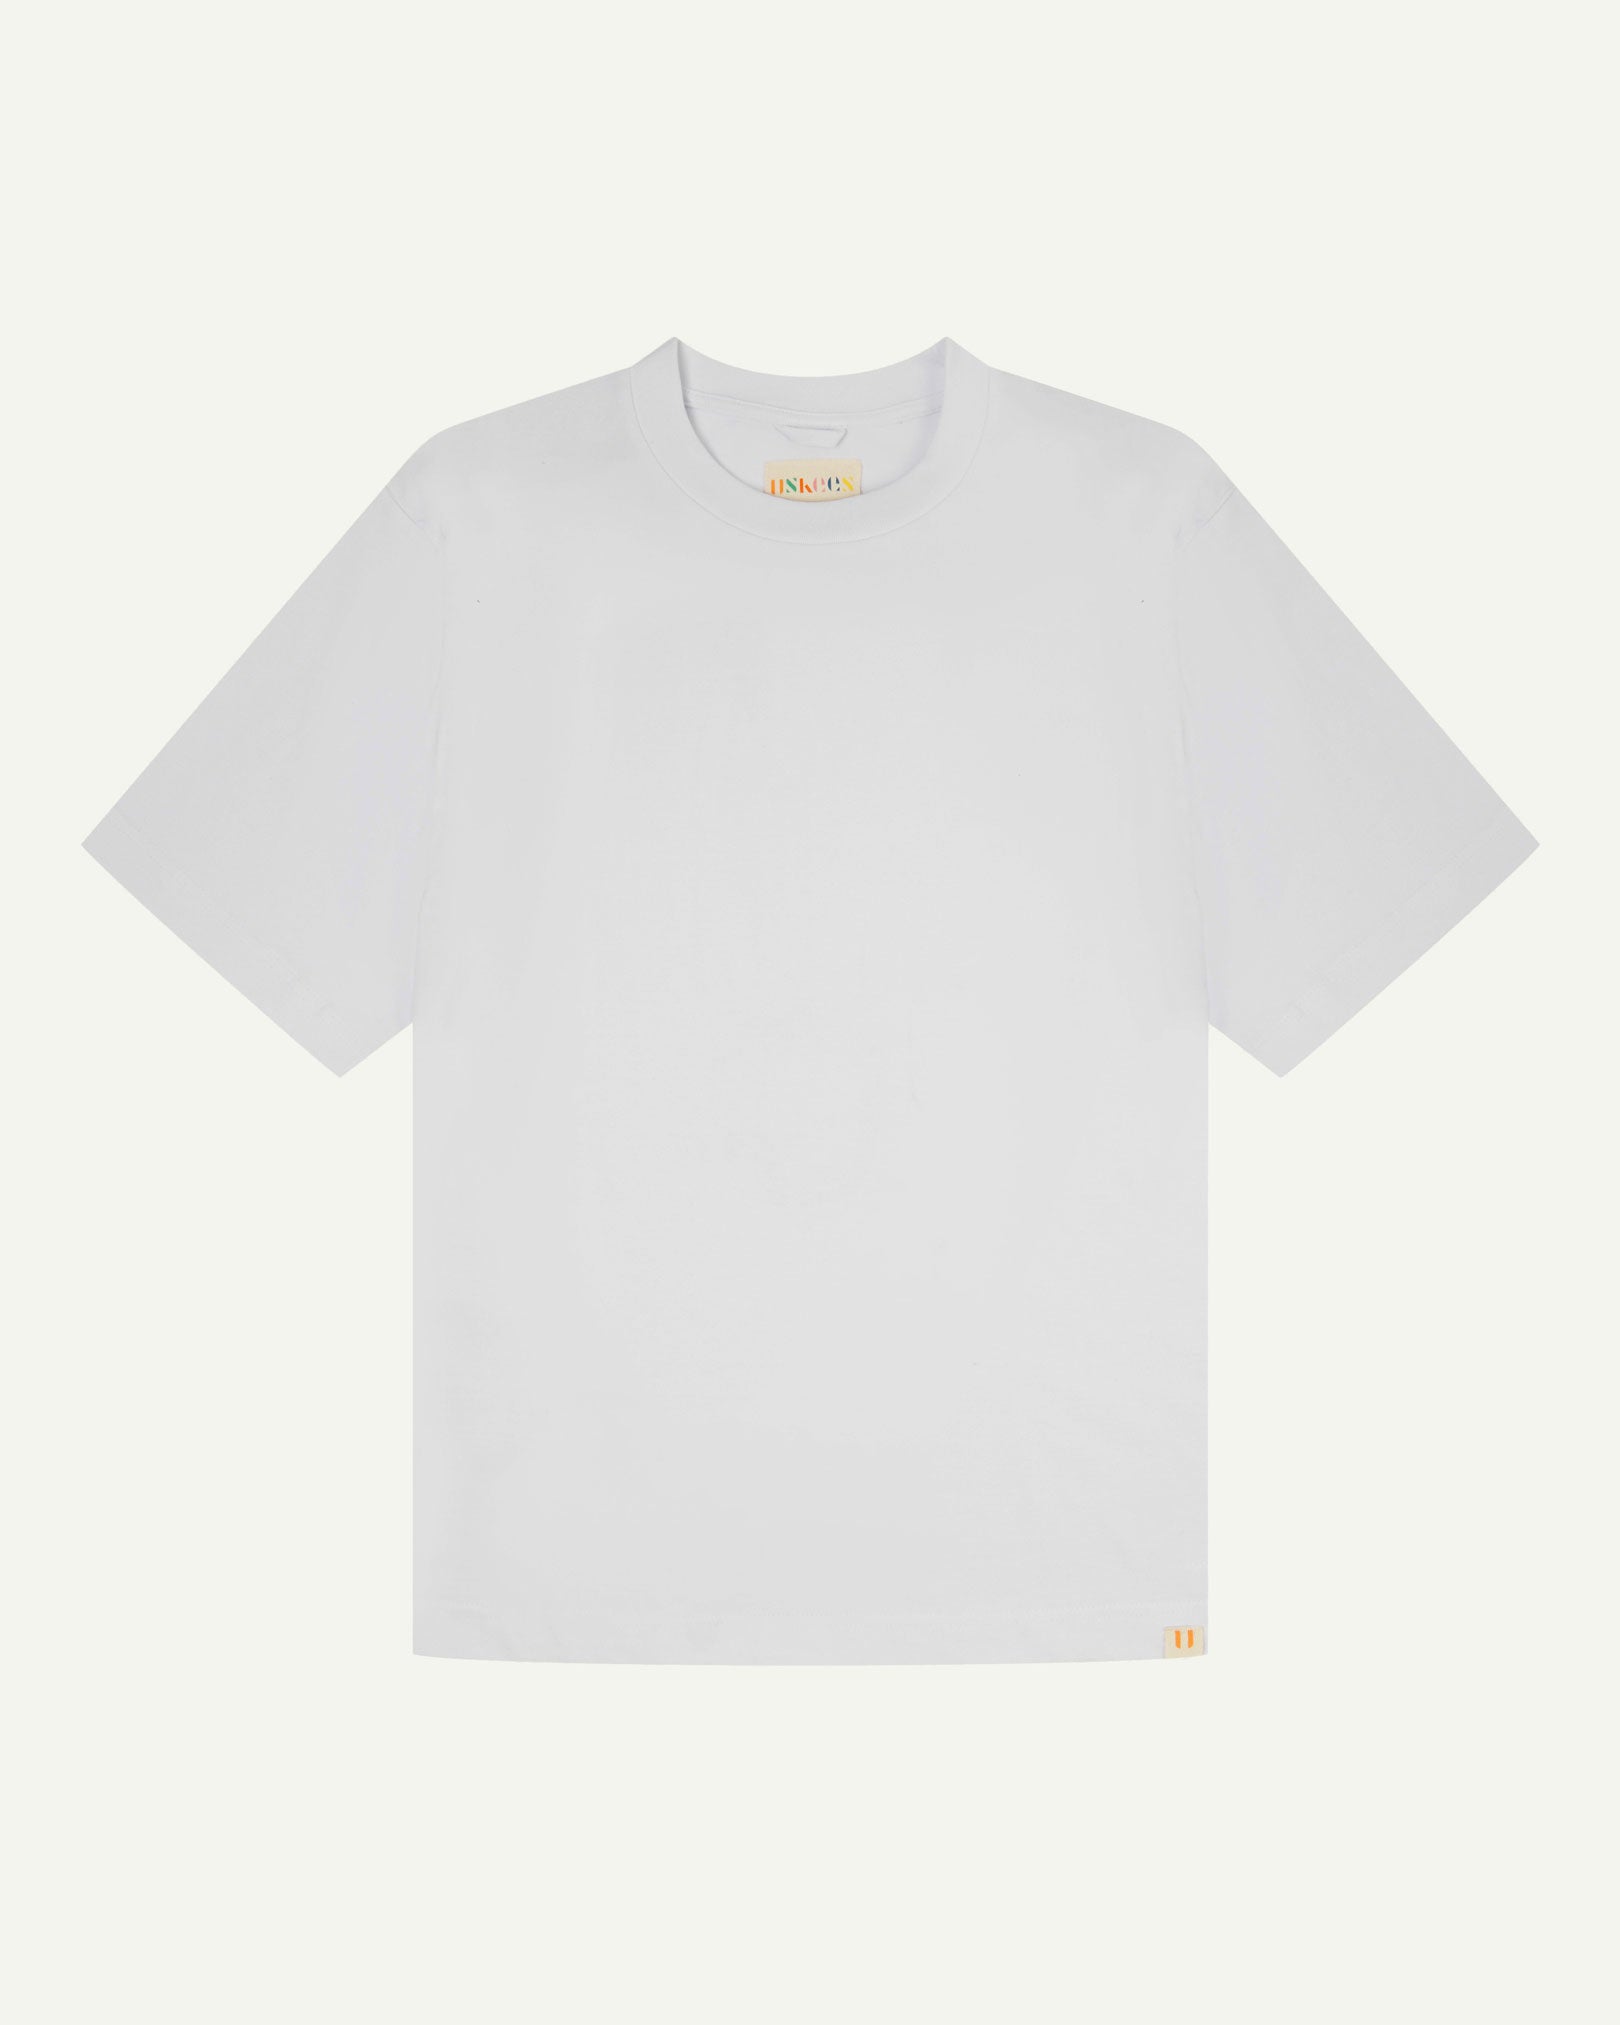 Full flat view of white, organic cotton, oversized T-shirt from Uskees.